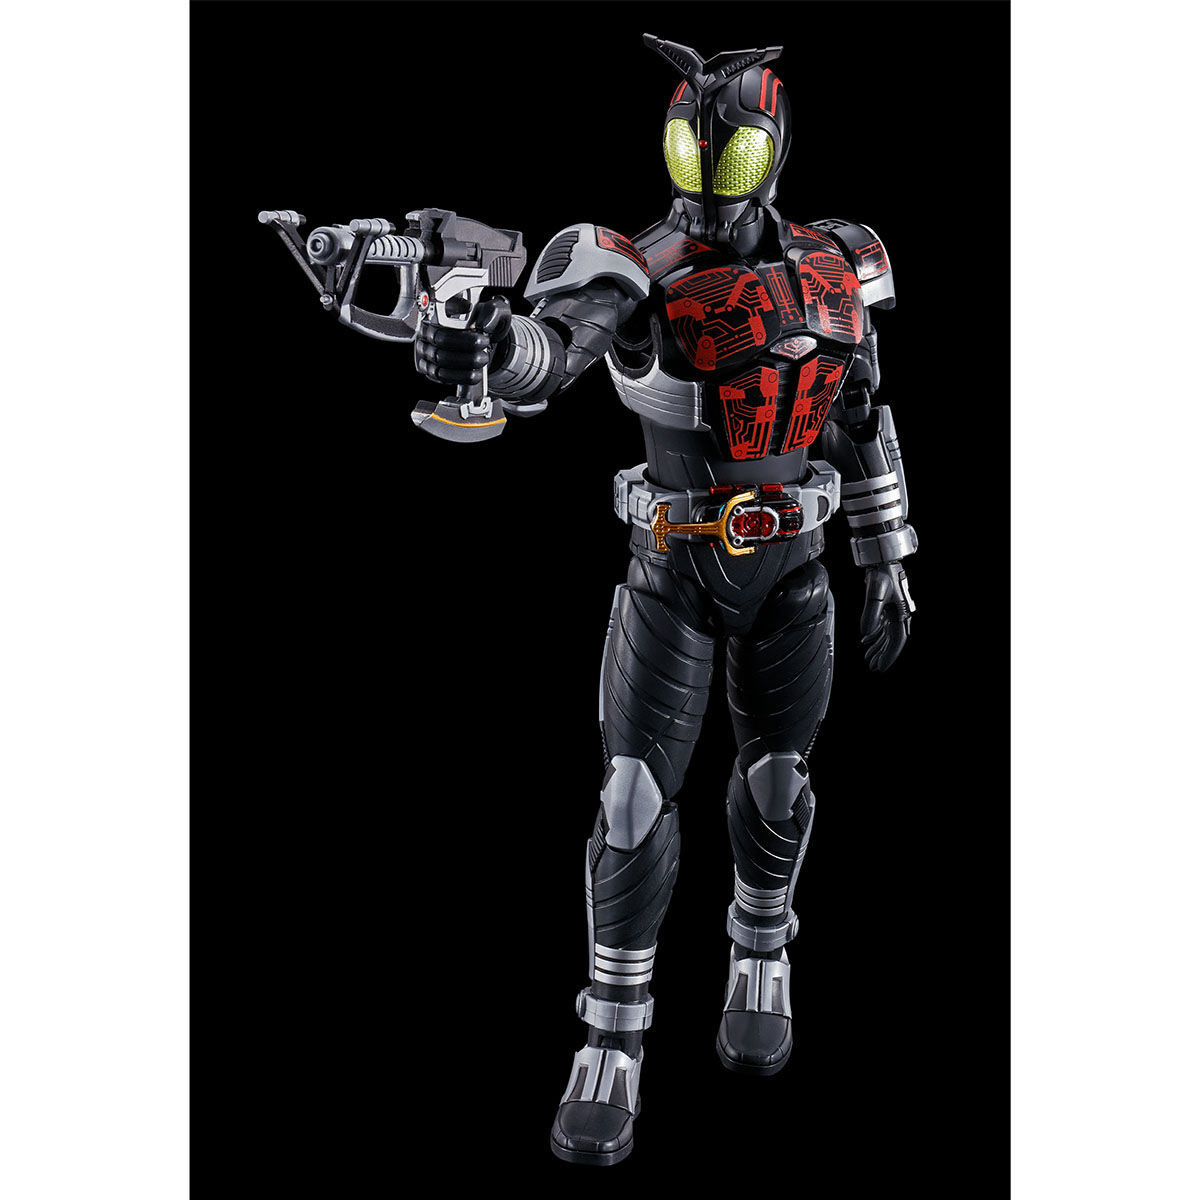 PREMIUM BANDAI USA [Official] Online Store for Action Figures, Model Kits,  Toys and more